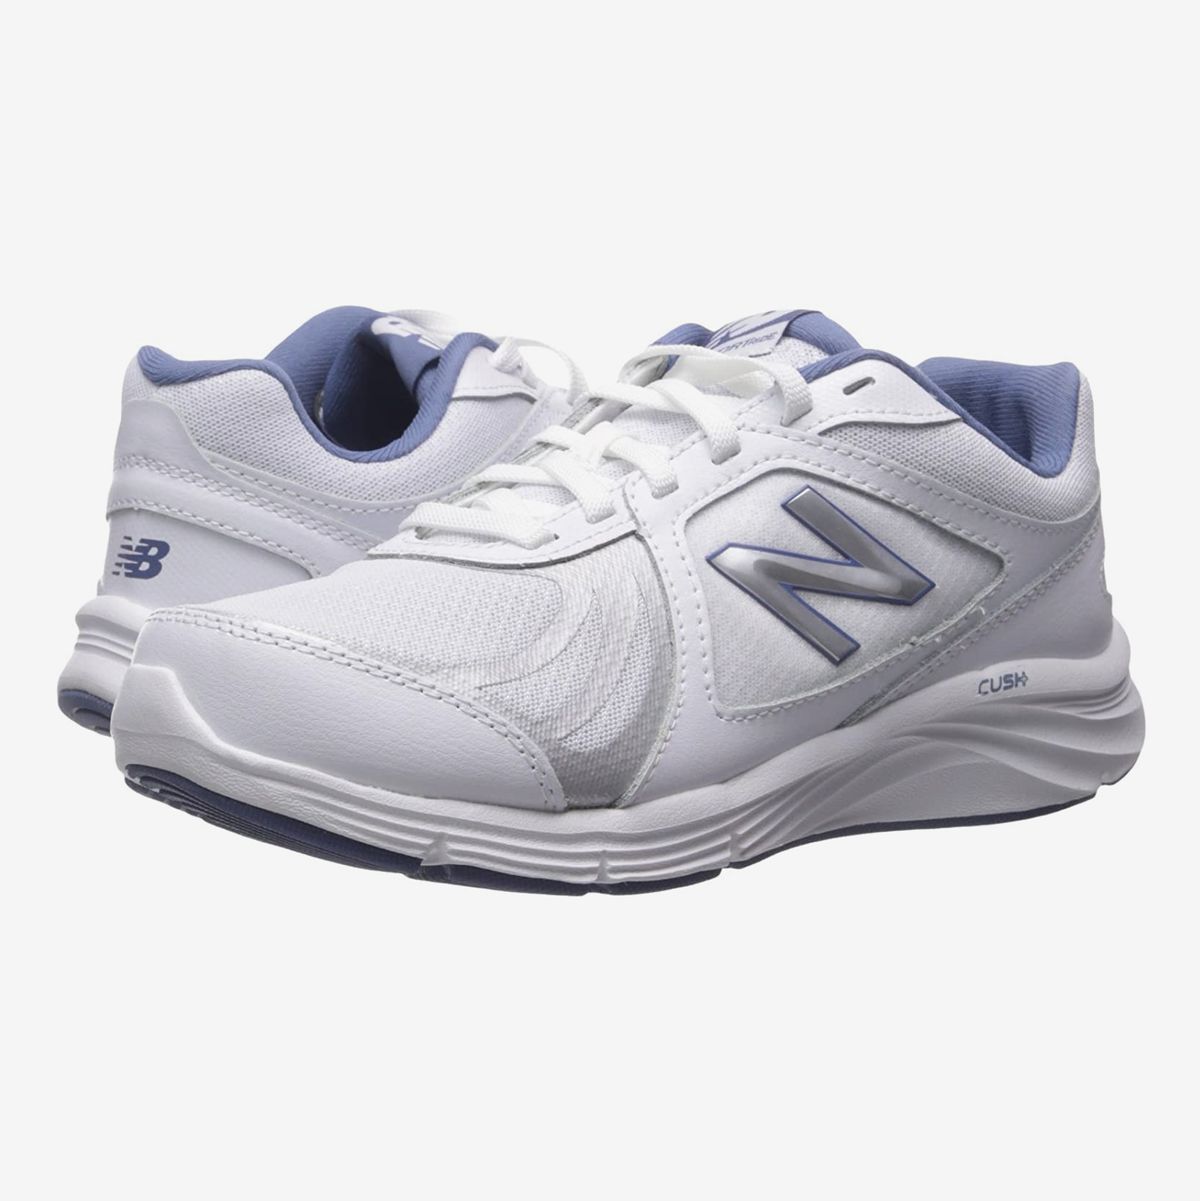 most expensive new balance sneakers